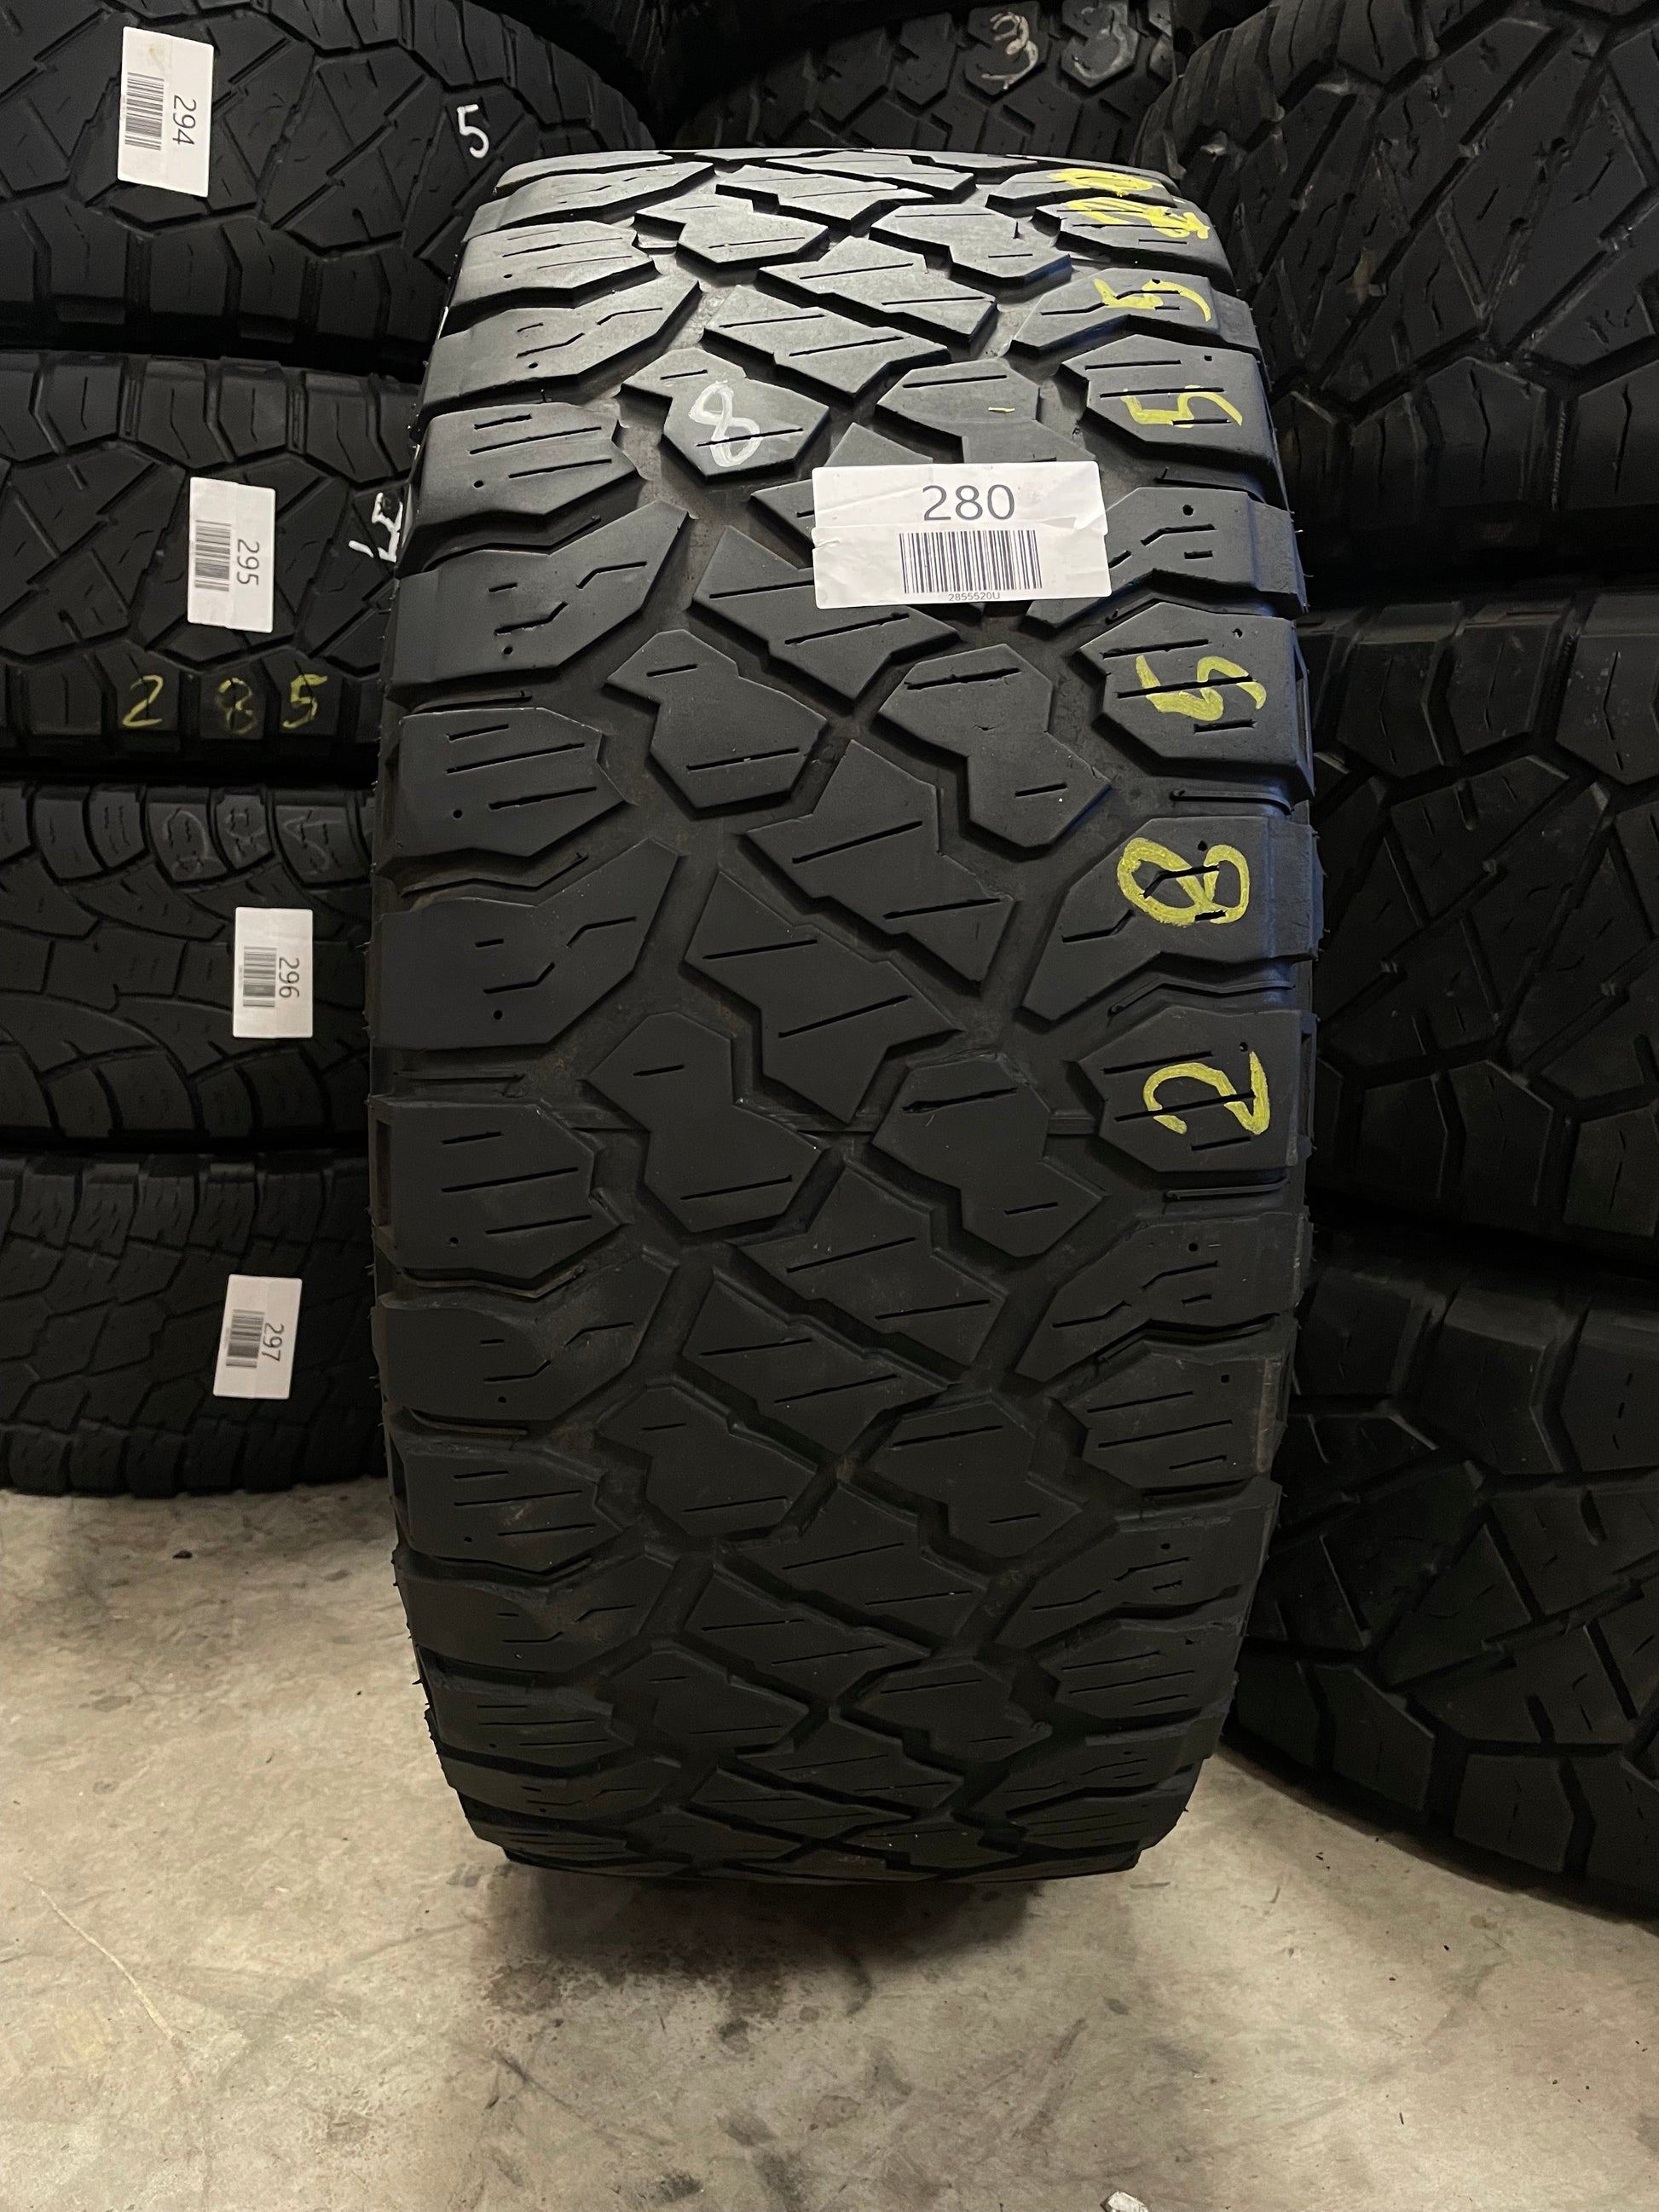 PAIR OF 285/55R20 Kenda Klever R/T 122/119R E - Used Tires